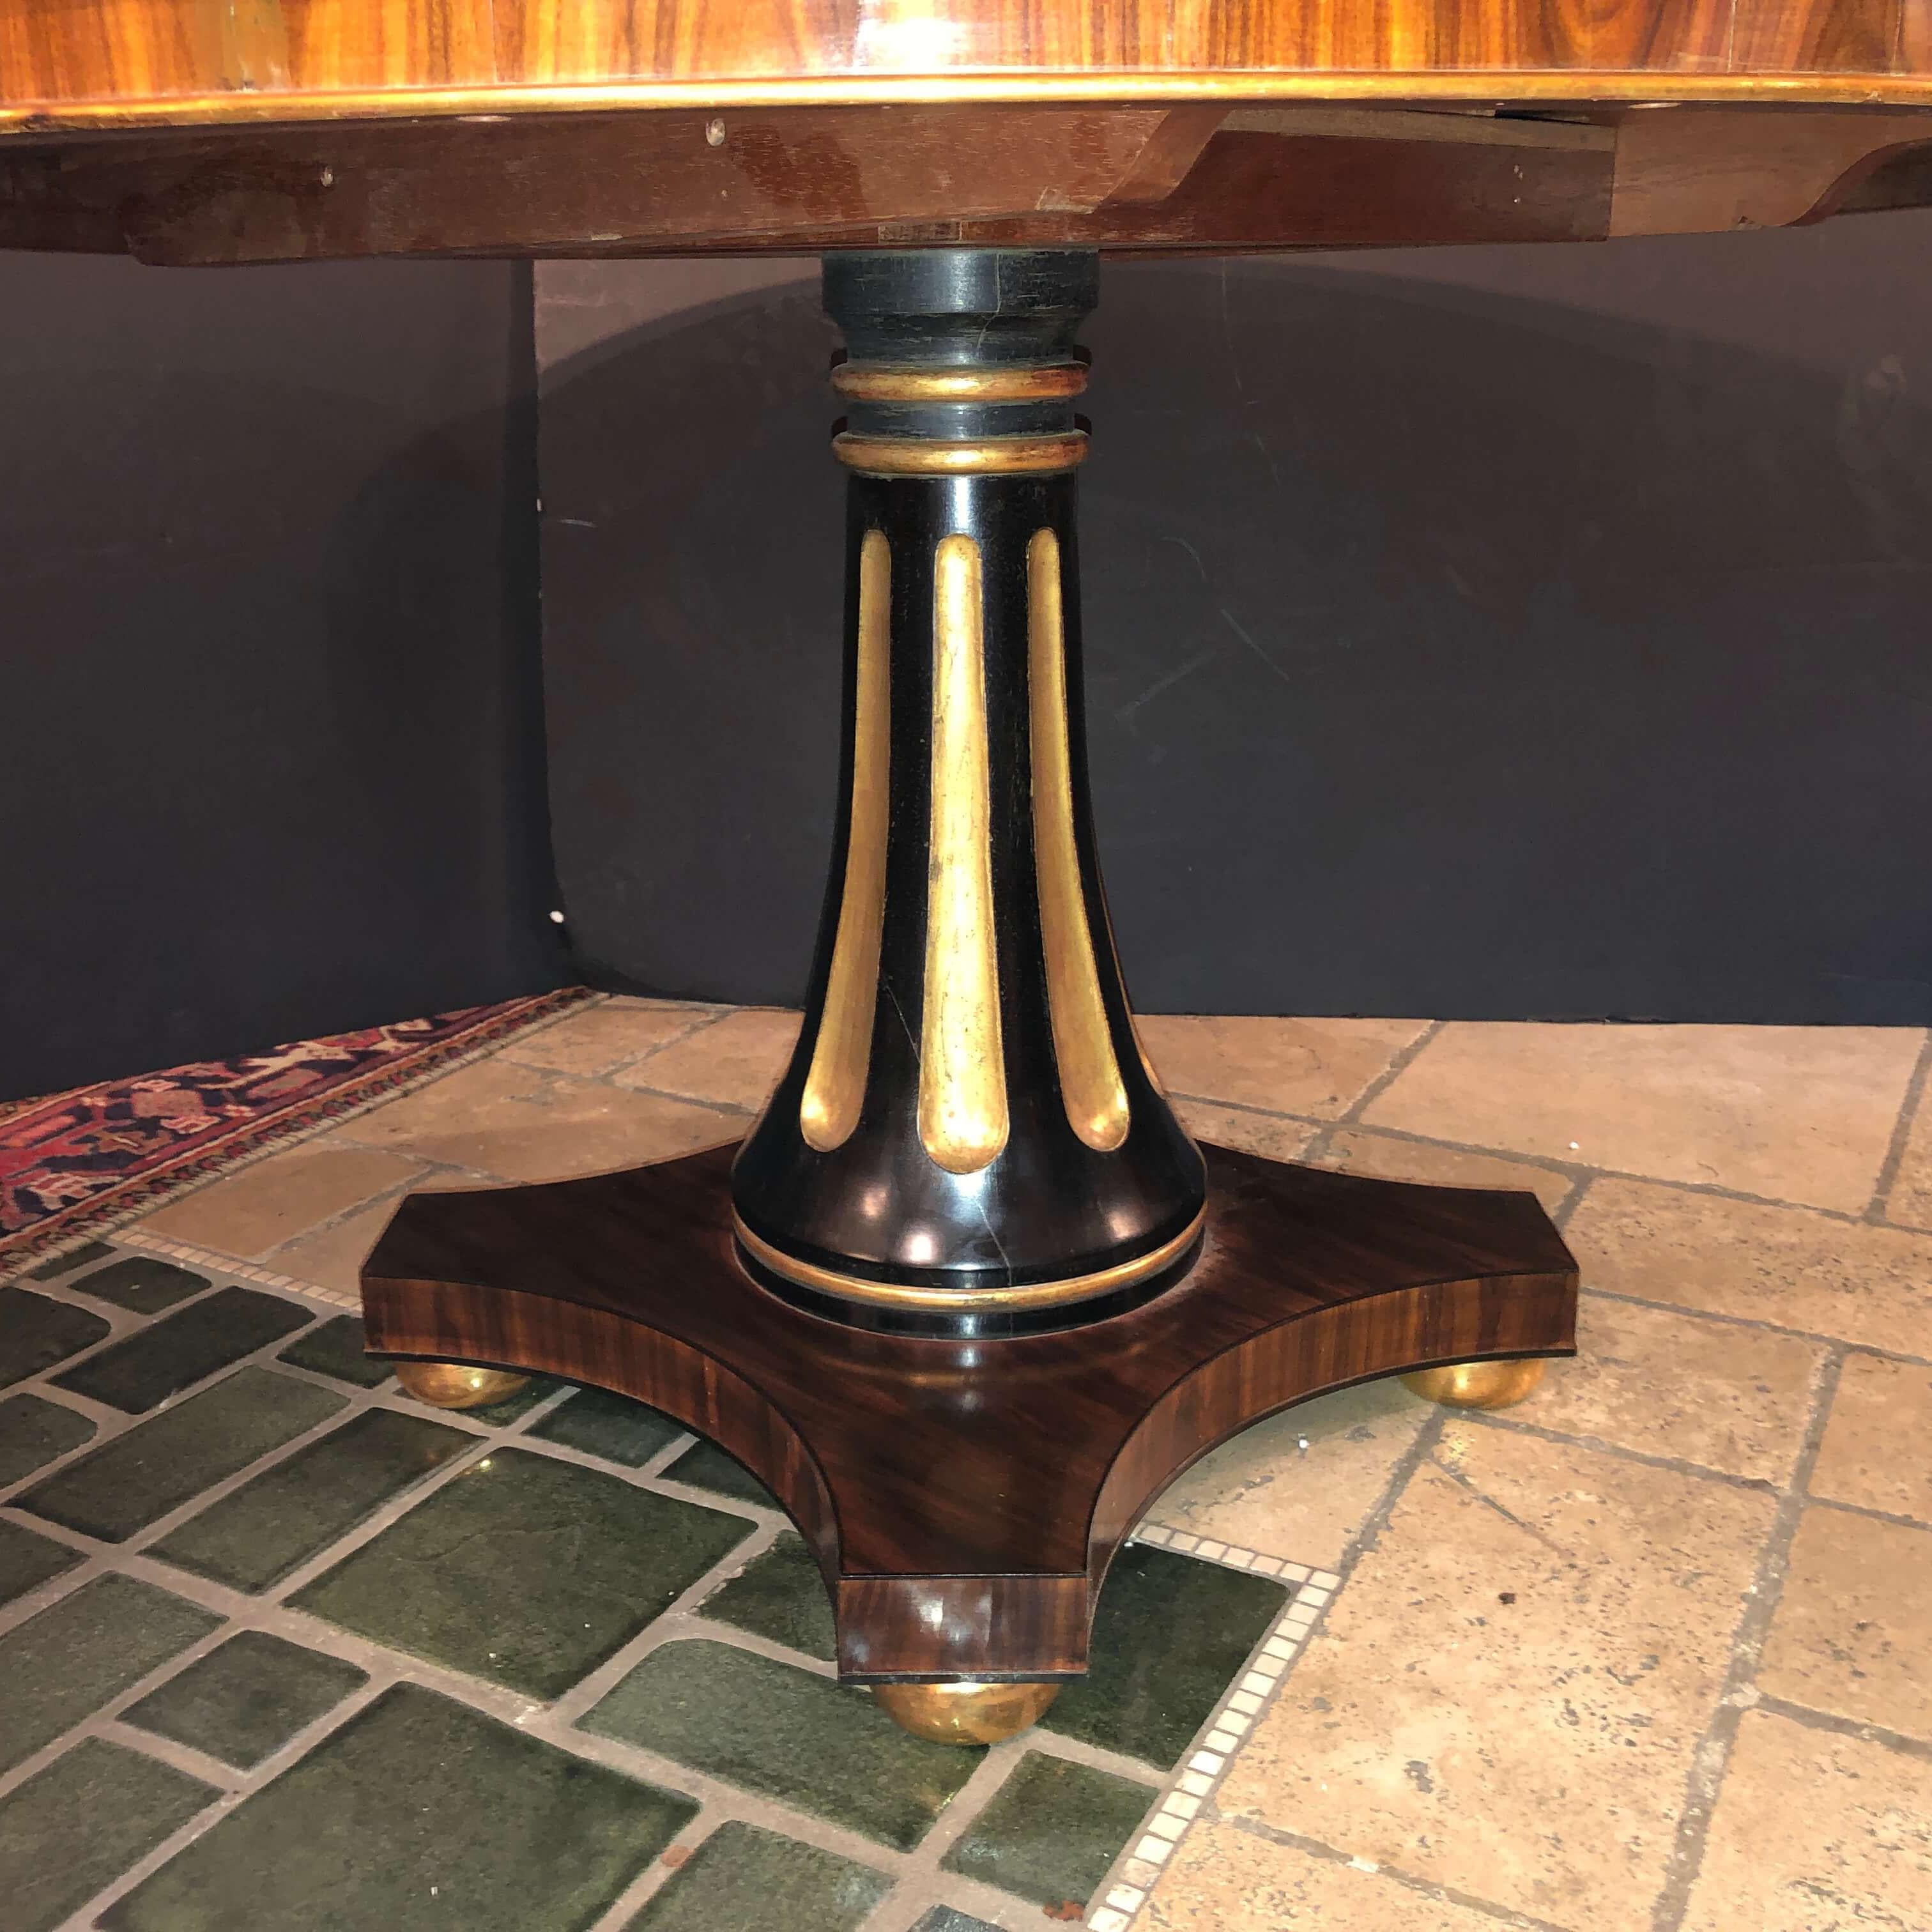 A fine English Regency style rosewood round center table with gilded trim raised on a flitted ebonized and gilt pedestal base with gilt bun feet.
Modern custom reproduction from our London Workshop.